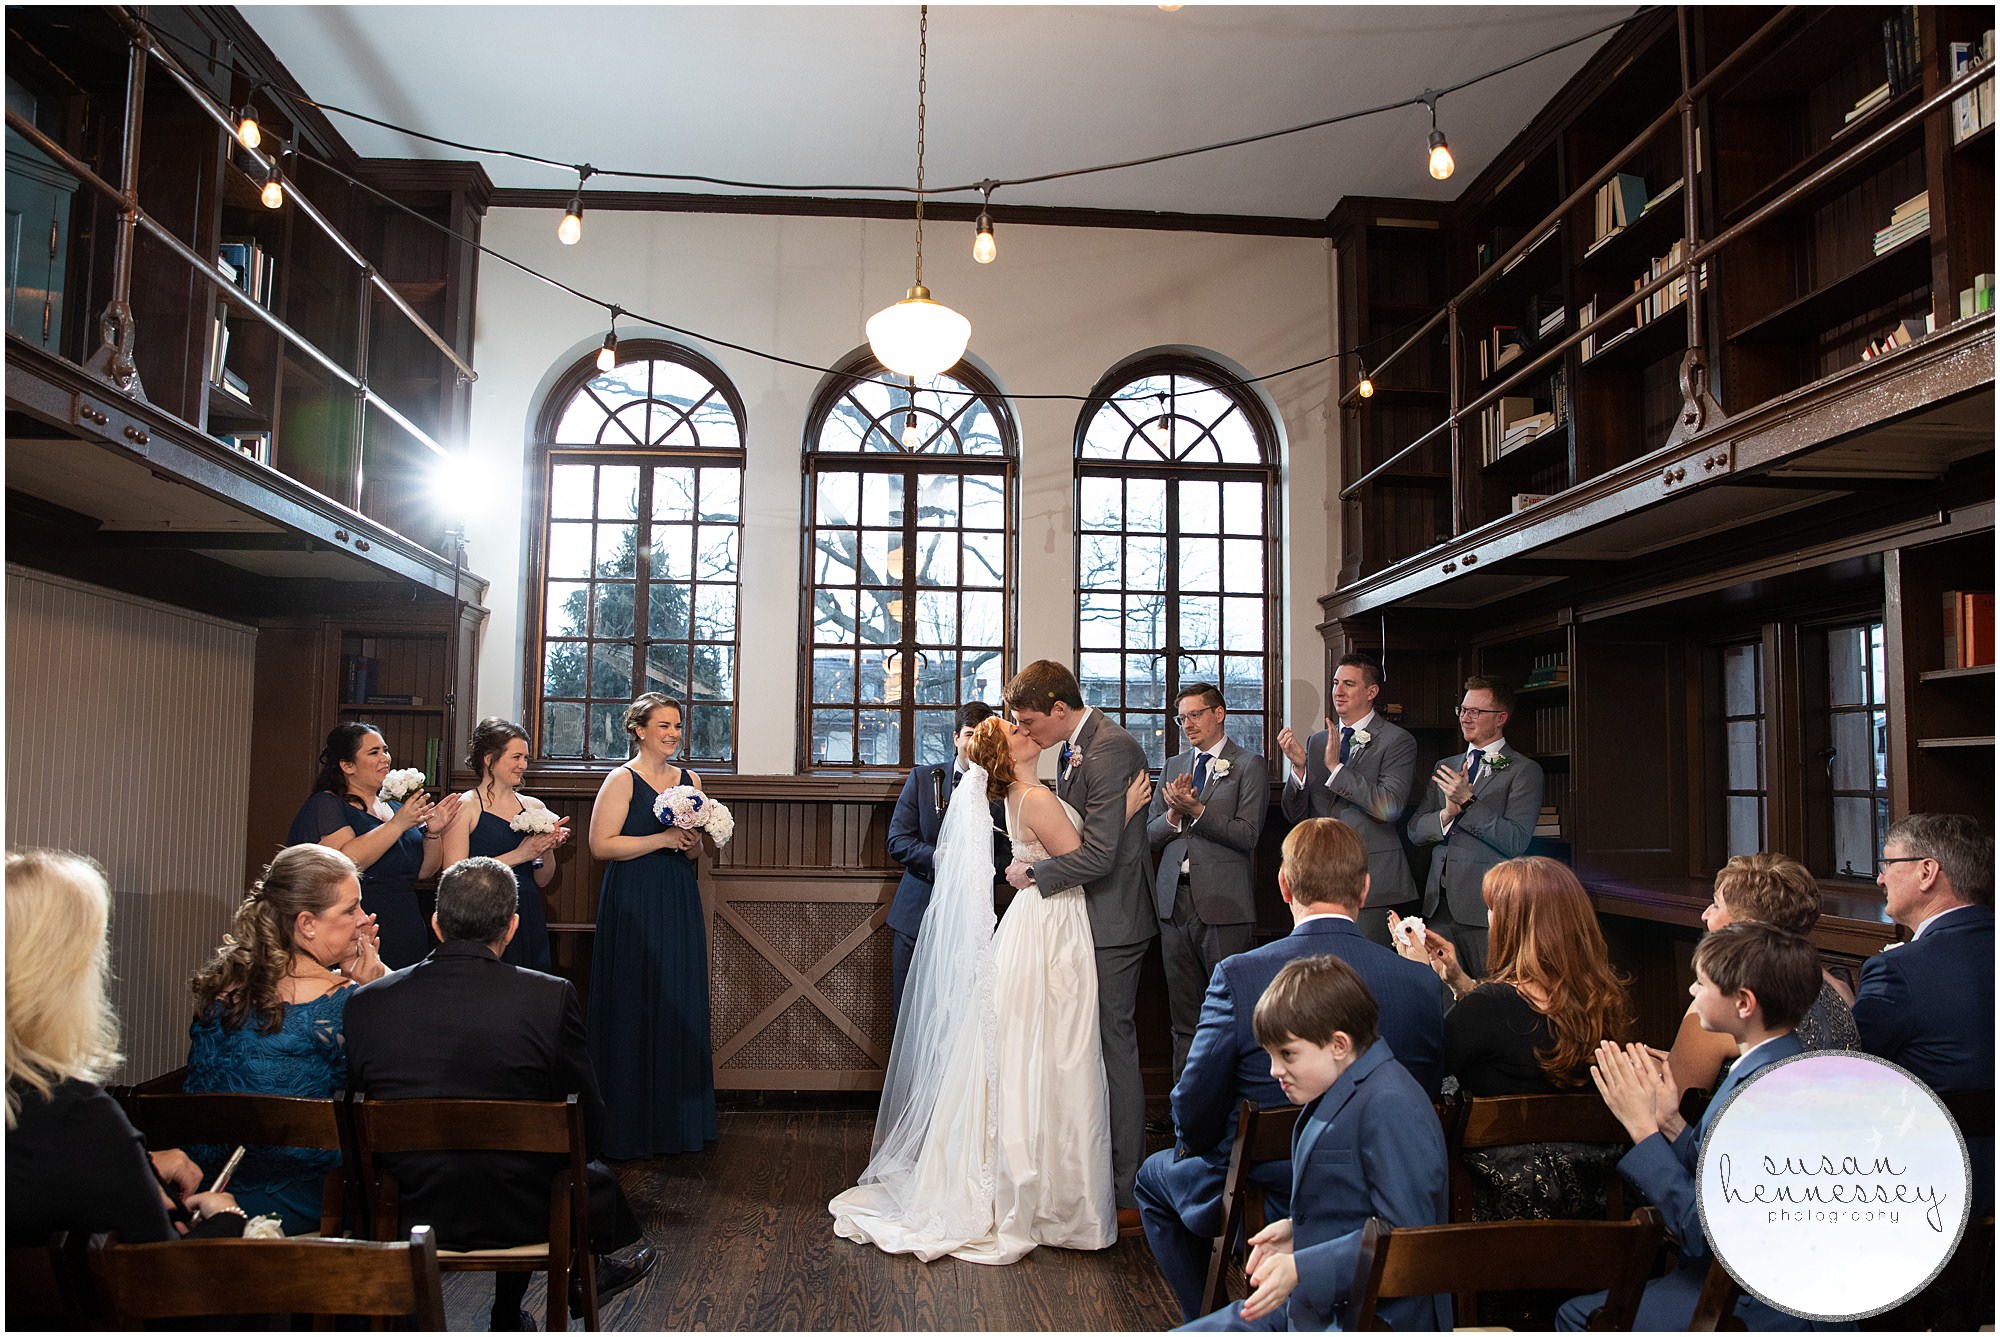 Susan Hennessey Photography Best of 2020 Weddings - The Community House of Moorestown indoor ceremony